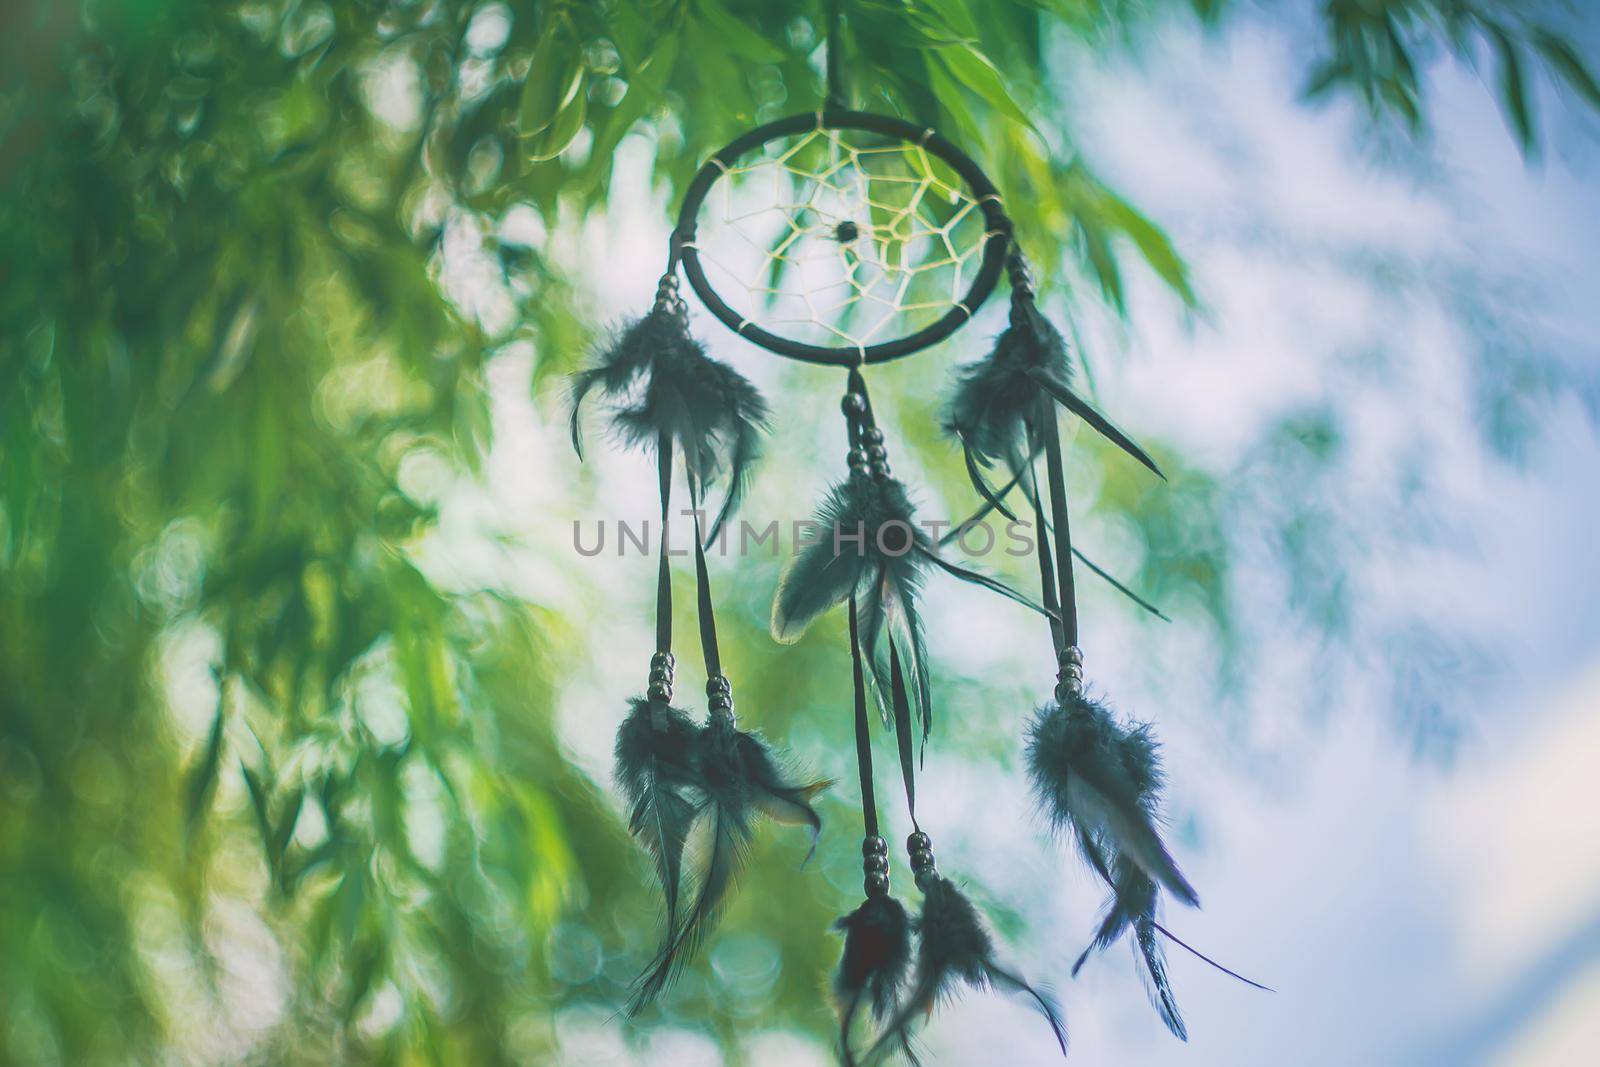 Dream catcher in a vintage style. Selective focus. nature.